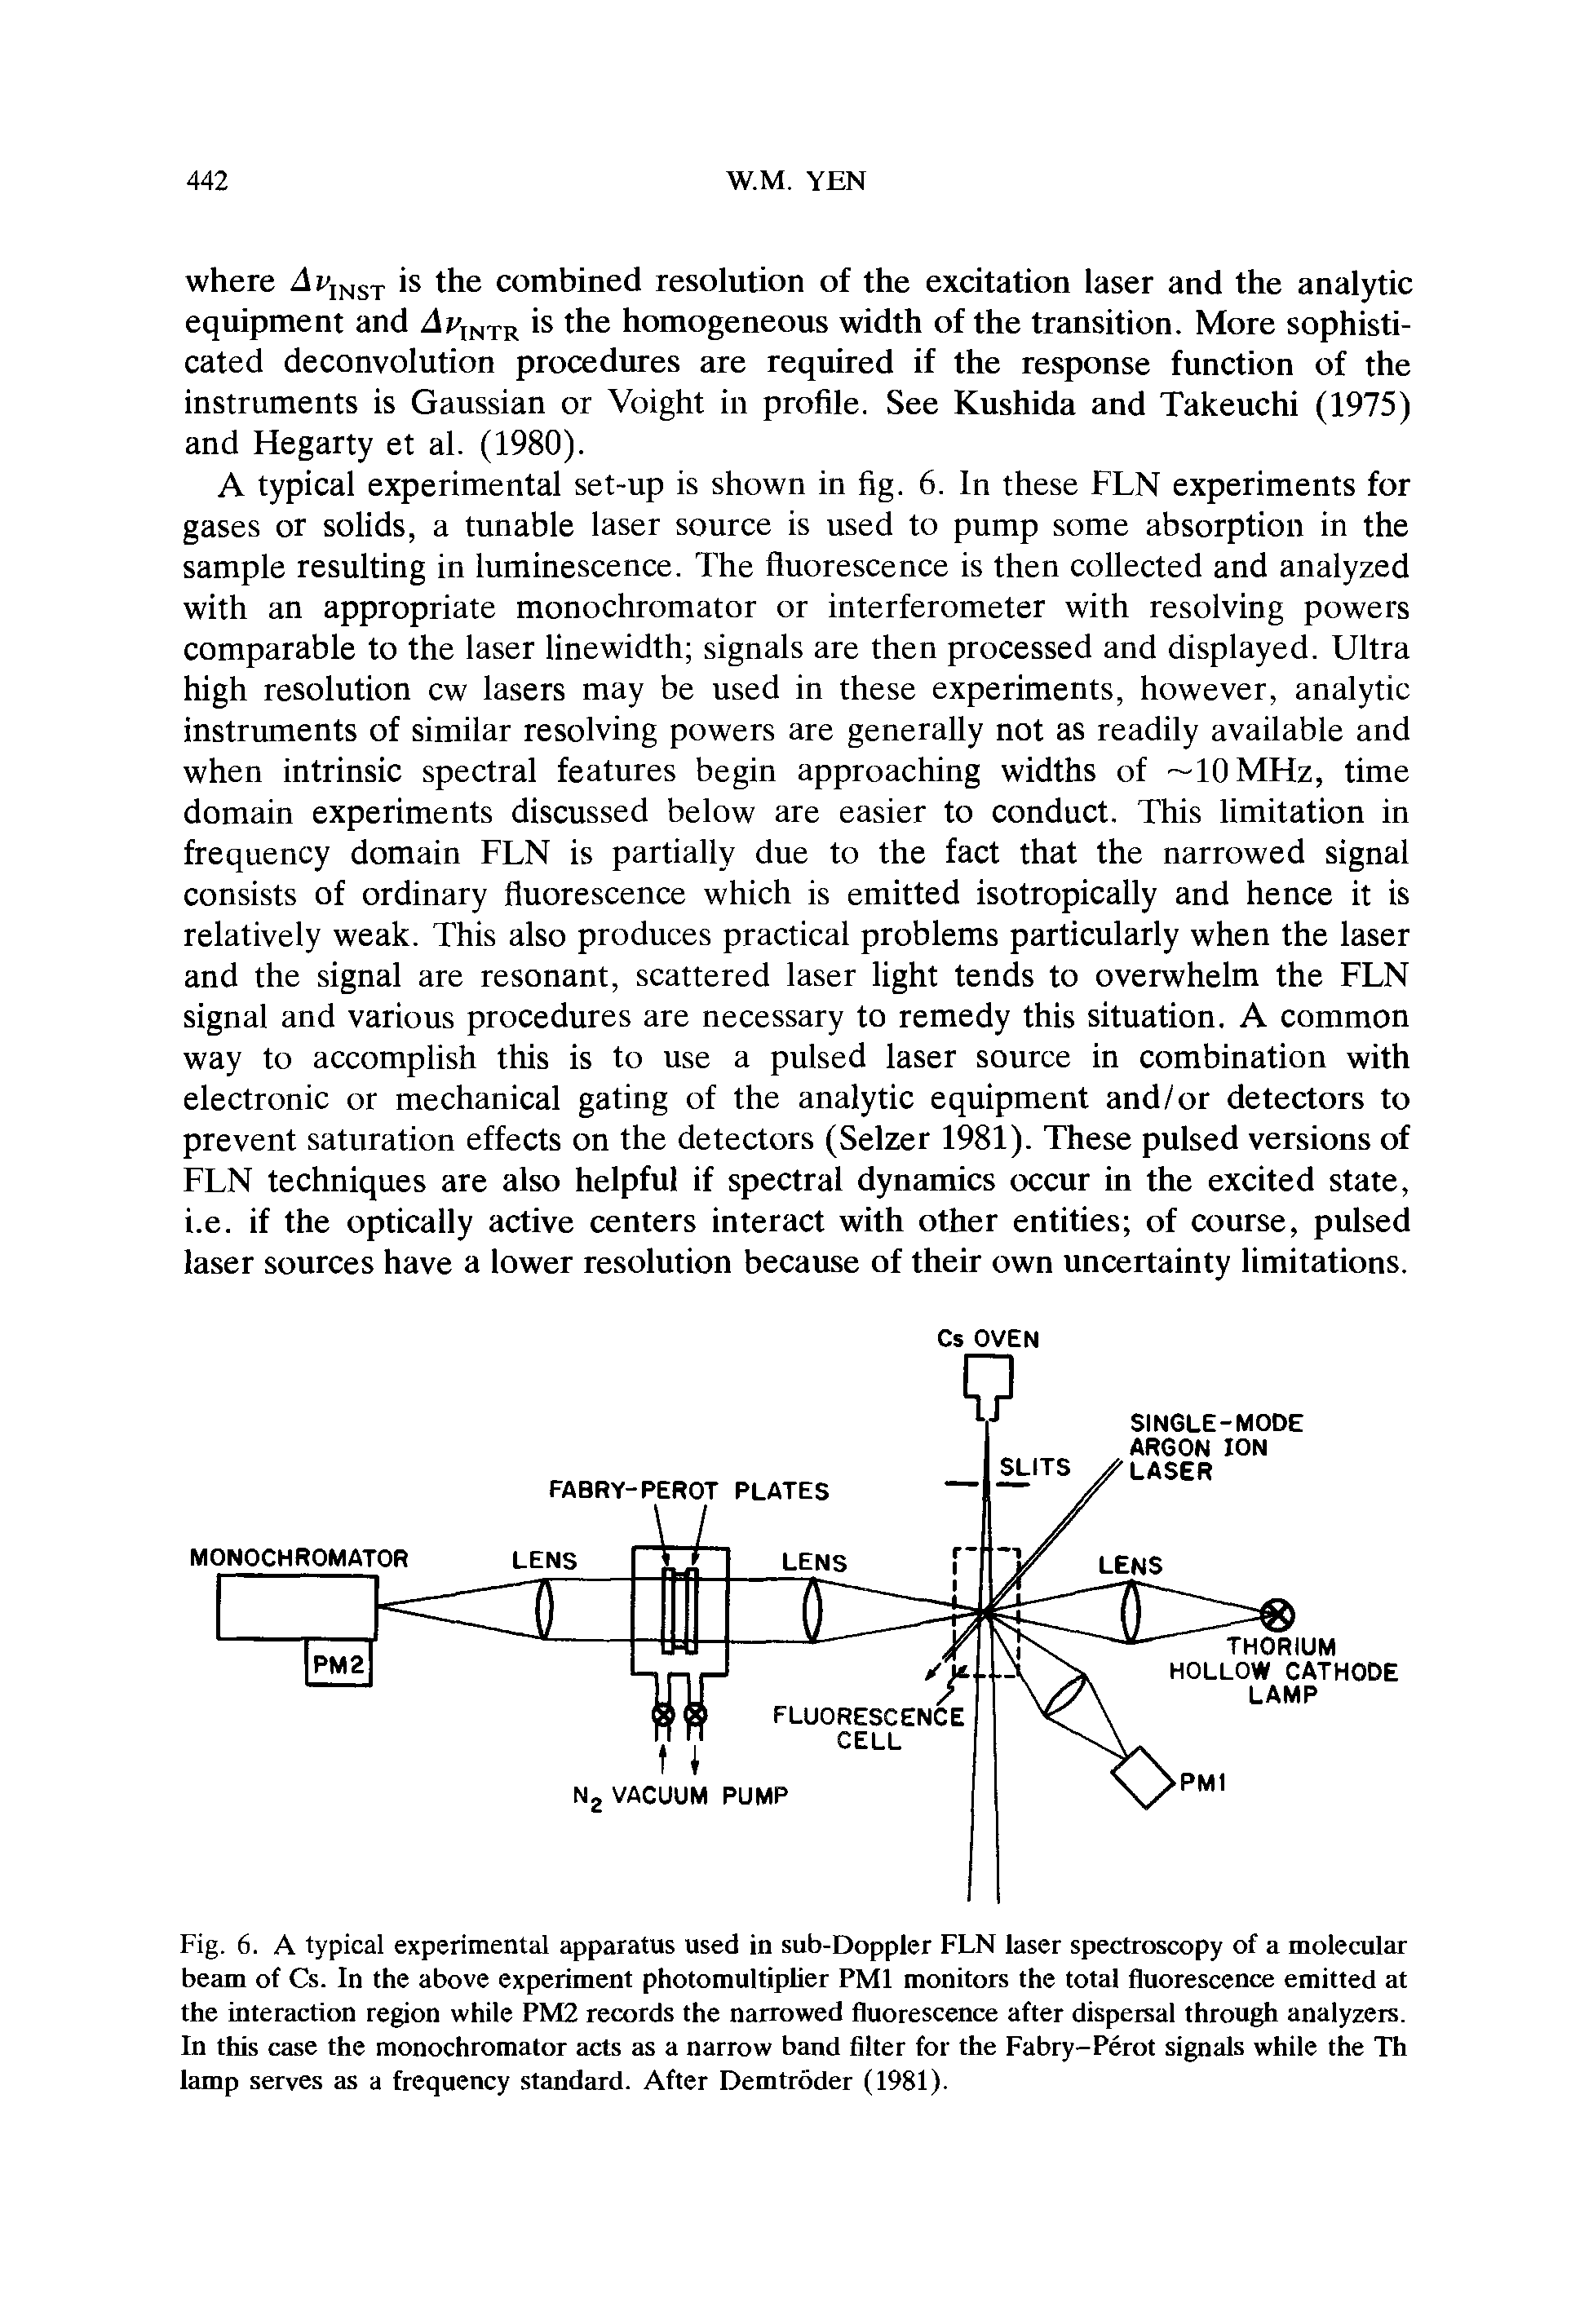 Fig. 6. A typical experimental apparatus used in sub-Doppler FLN laser spectroscopy of a molecular beam of Cs. In the above experiment photomultiplier PMl monitors the total fluorescence emitted at the interaction region while PM2 records the narrowed fluorescence after dispersal through analyzers. In this case the monochromator acts as a narrow band filter for the Fabry-Perot signals while the Th lamp serves as a frequency standard. After Demtroder (1981).